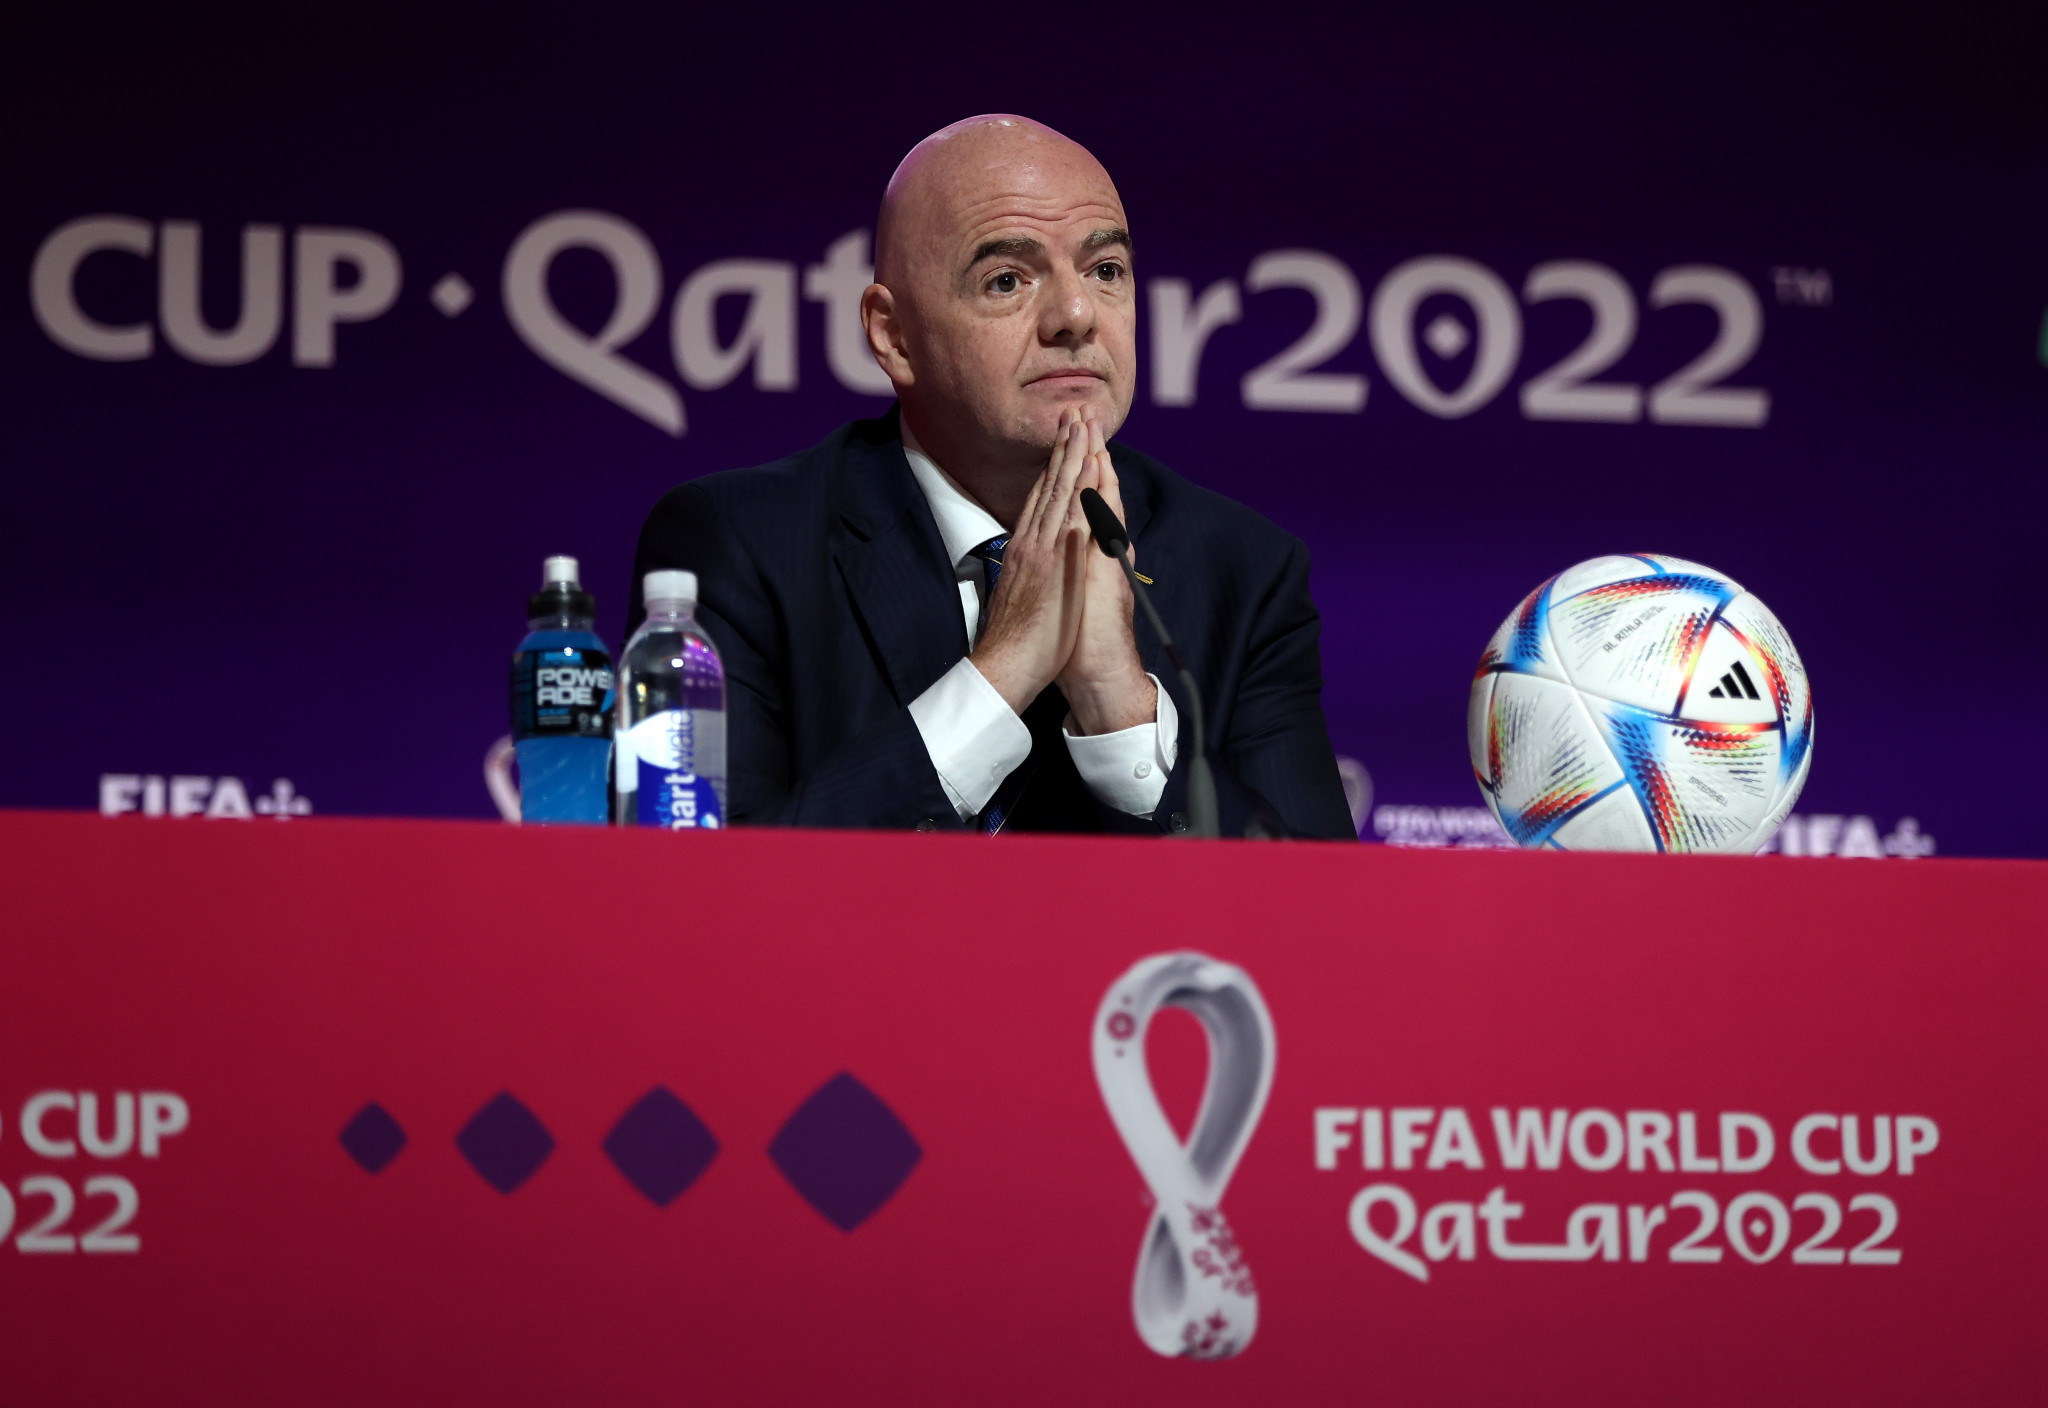 FIFA President Gianni Infantino, who is set for unopposed re-election next year, has claimed the changes to the World Cup provide 